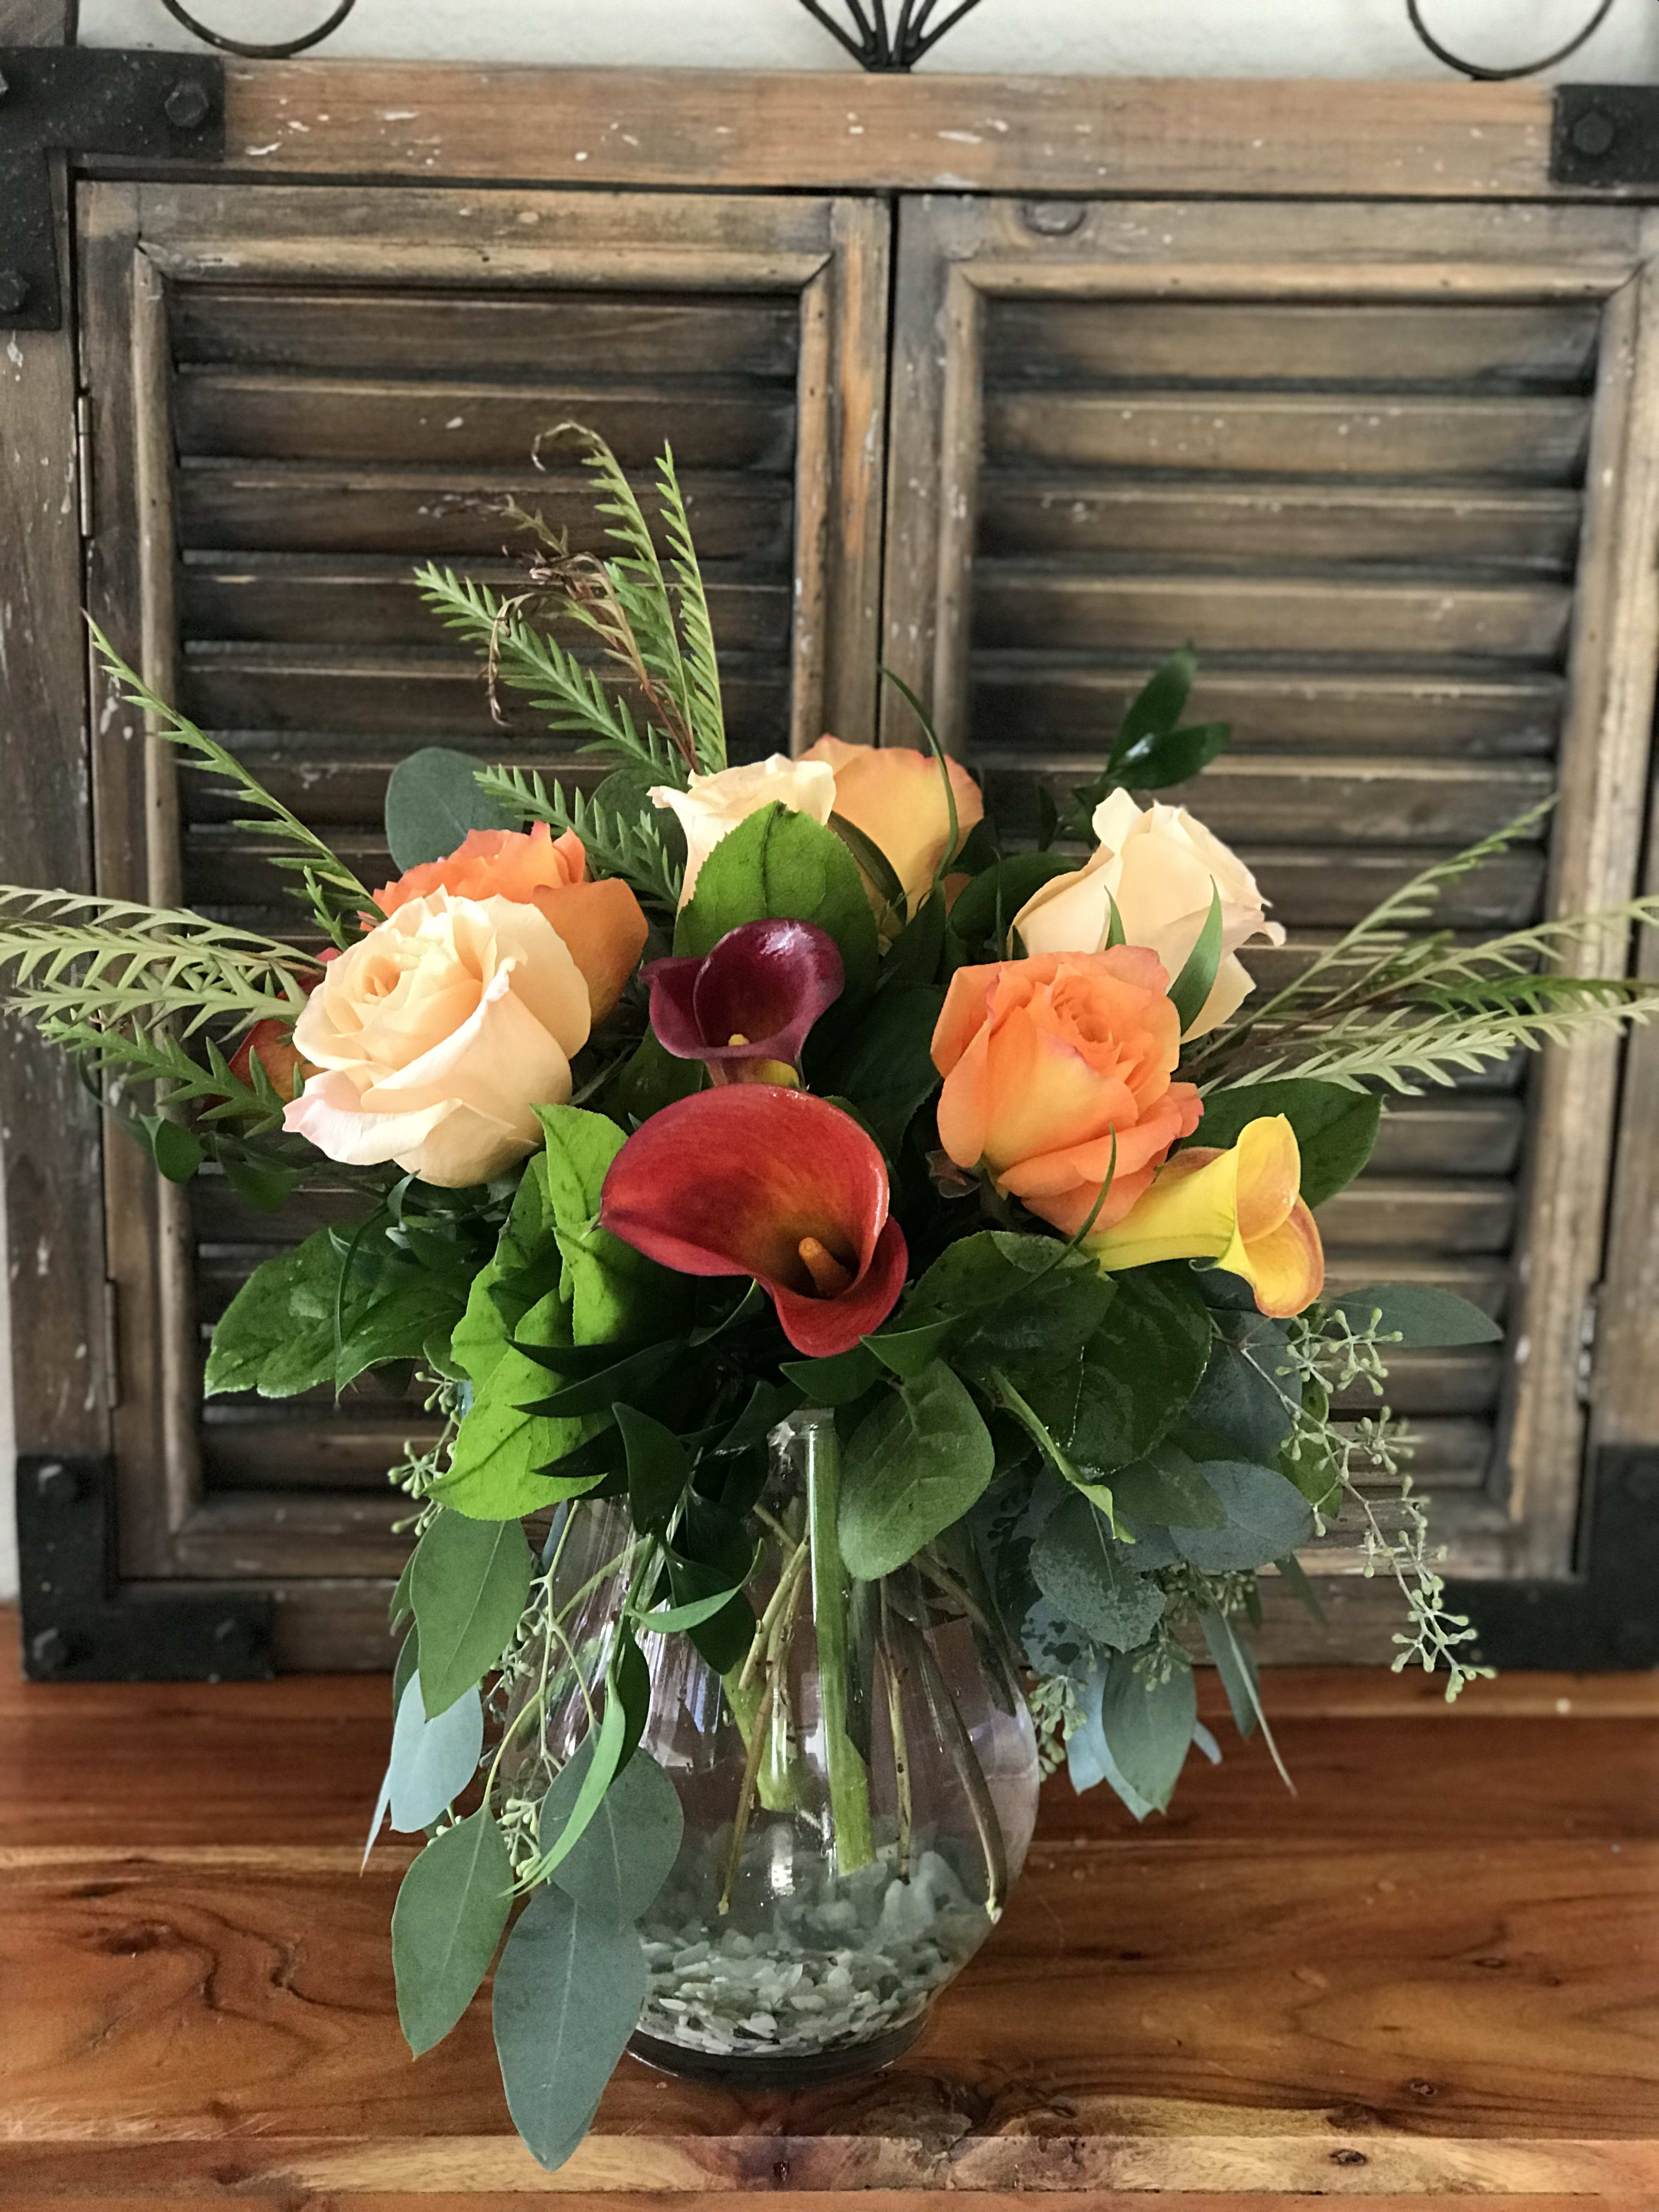 Seaside Fall - Roses and Calla Liles in fall shades create a versatile autumn themed bouquet. Cut fresh and made to order. 